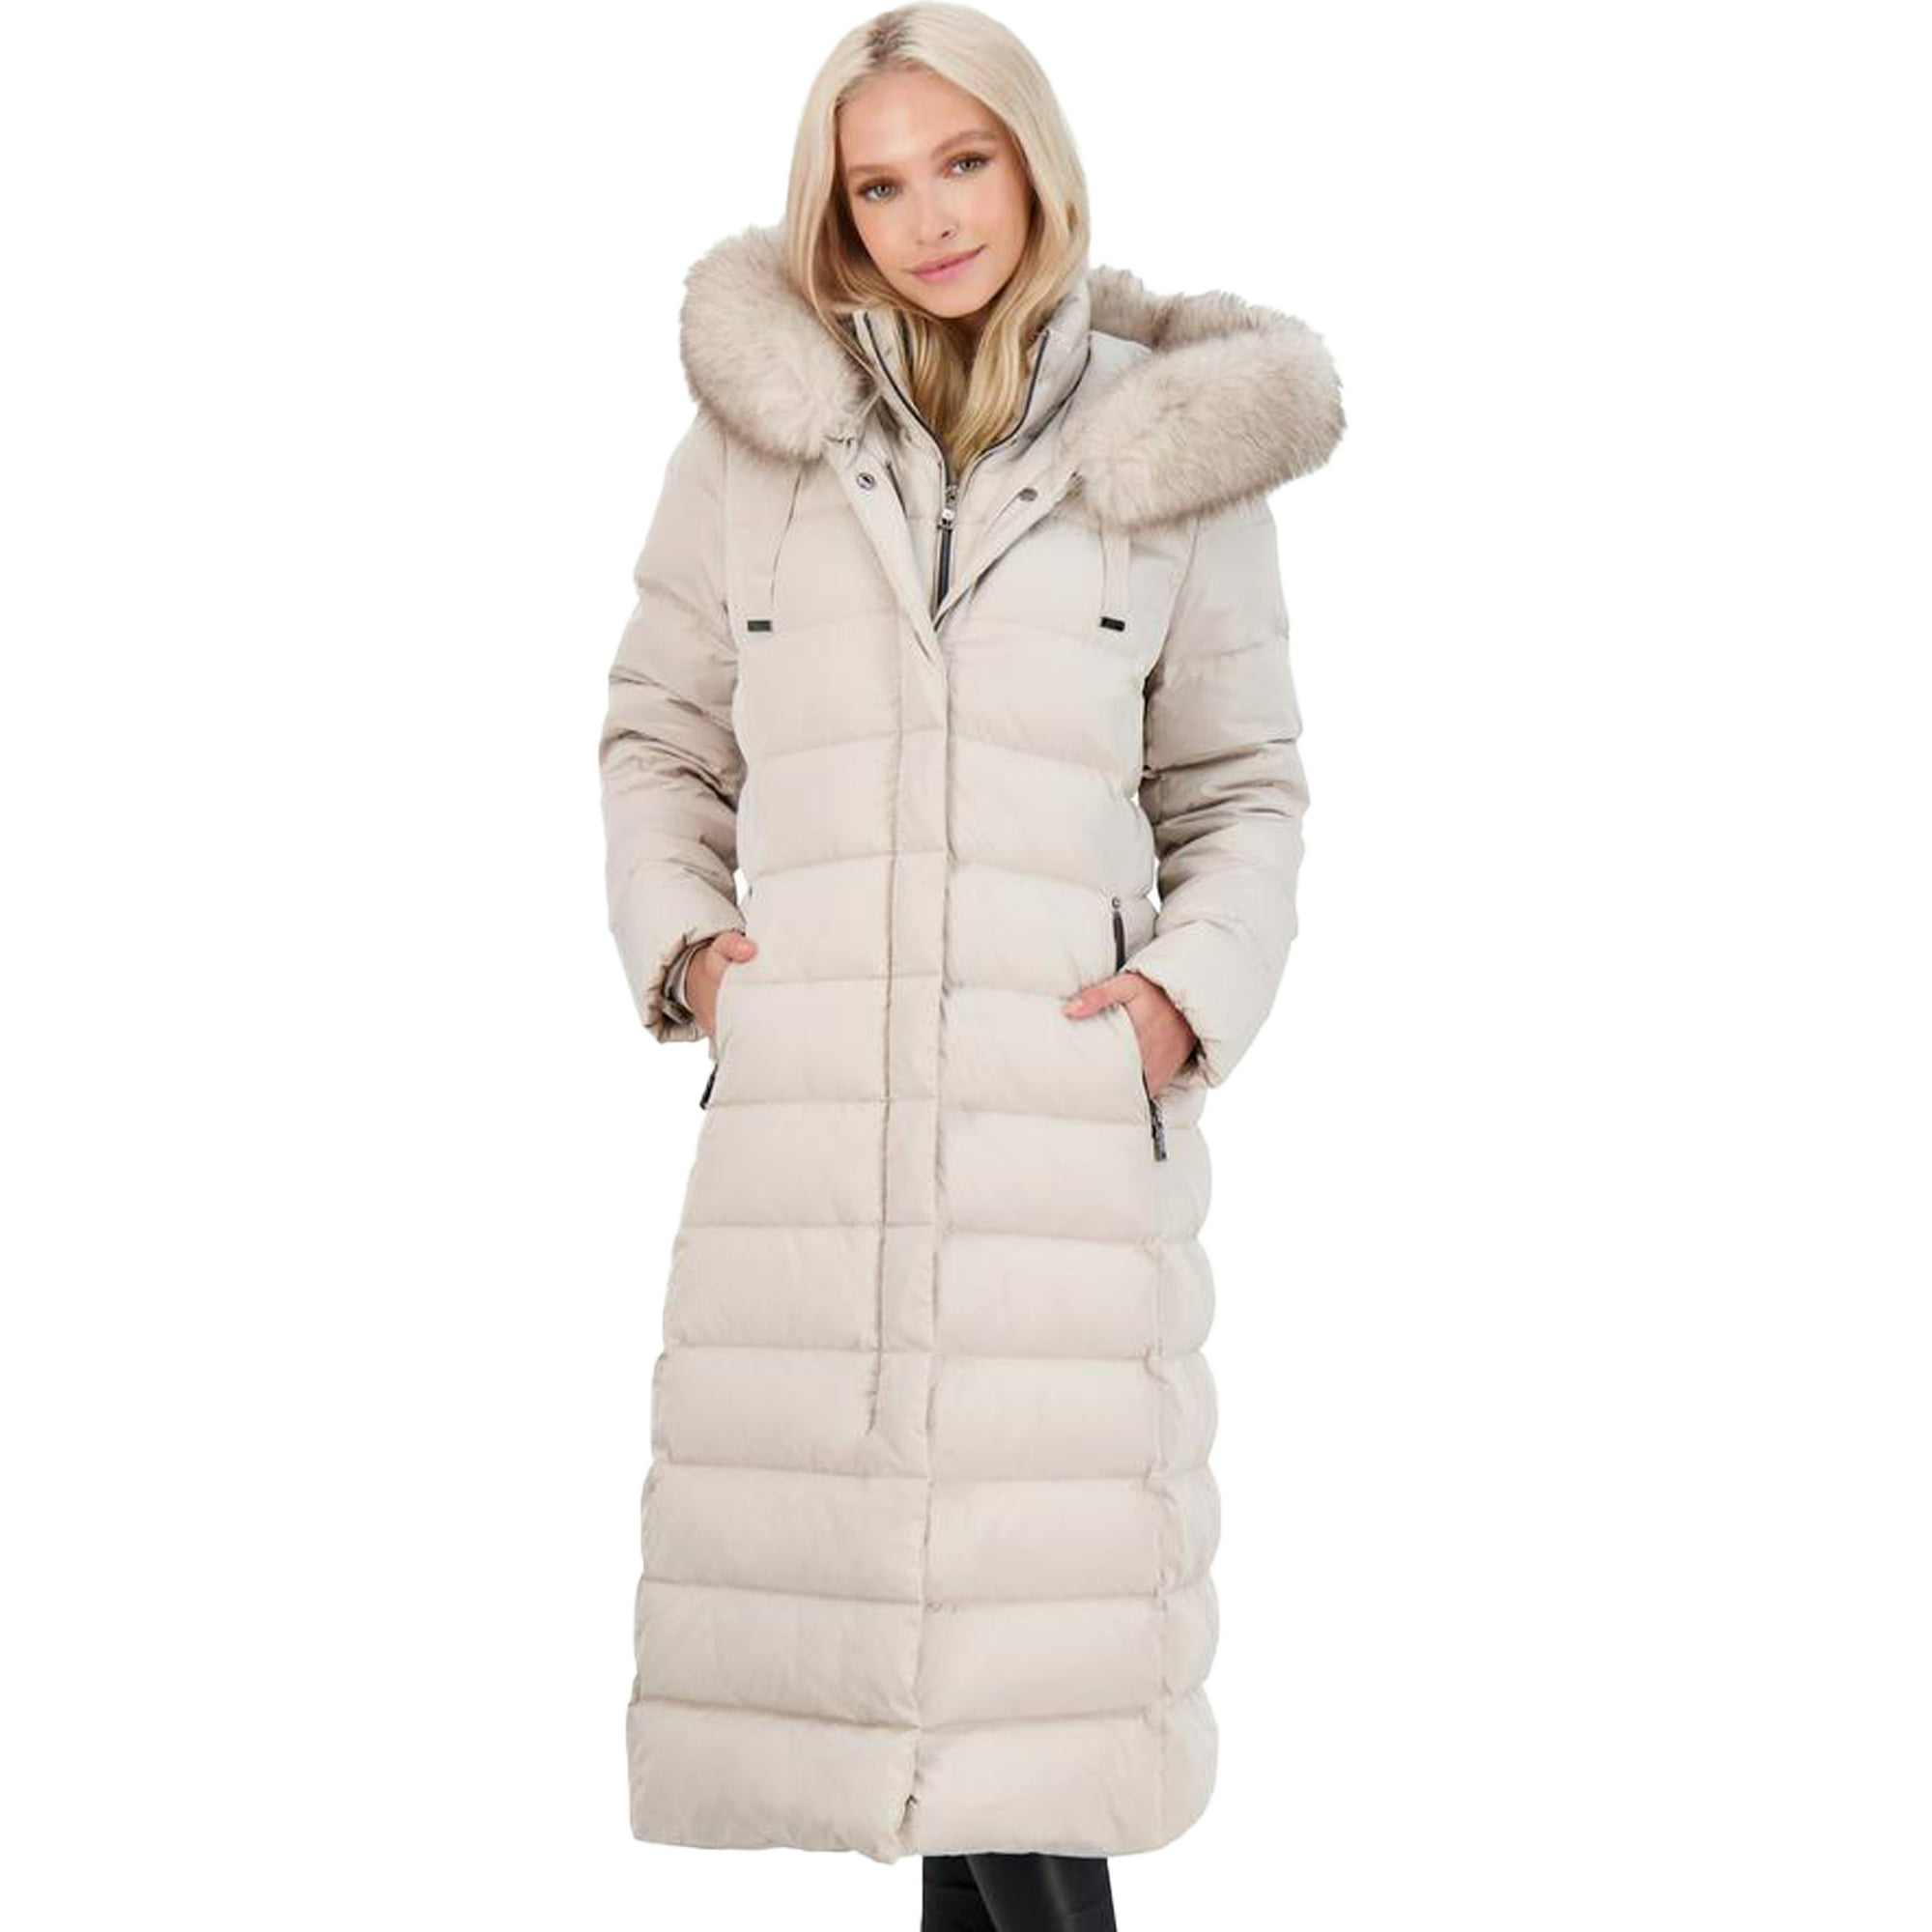 eksplodere At accelerere Teasing Tahari Nellie Long Coat for Women-Insulated Jacket with Removable Faux Fur  Trim - Walmart.com